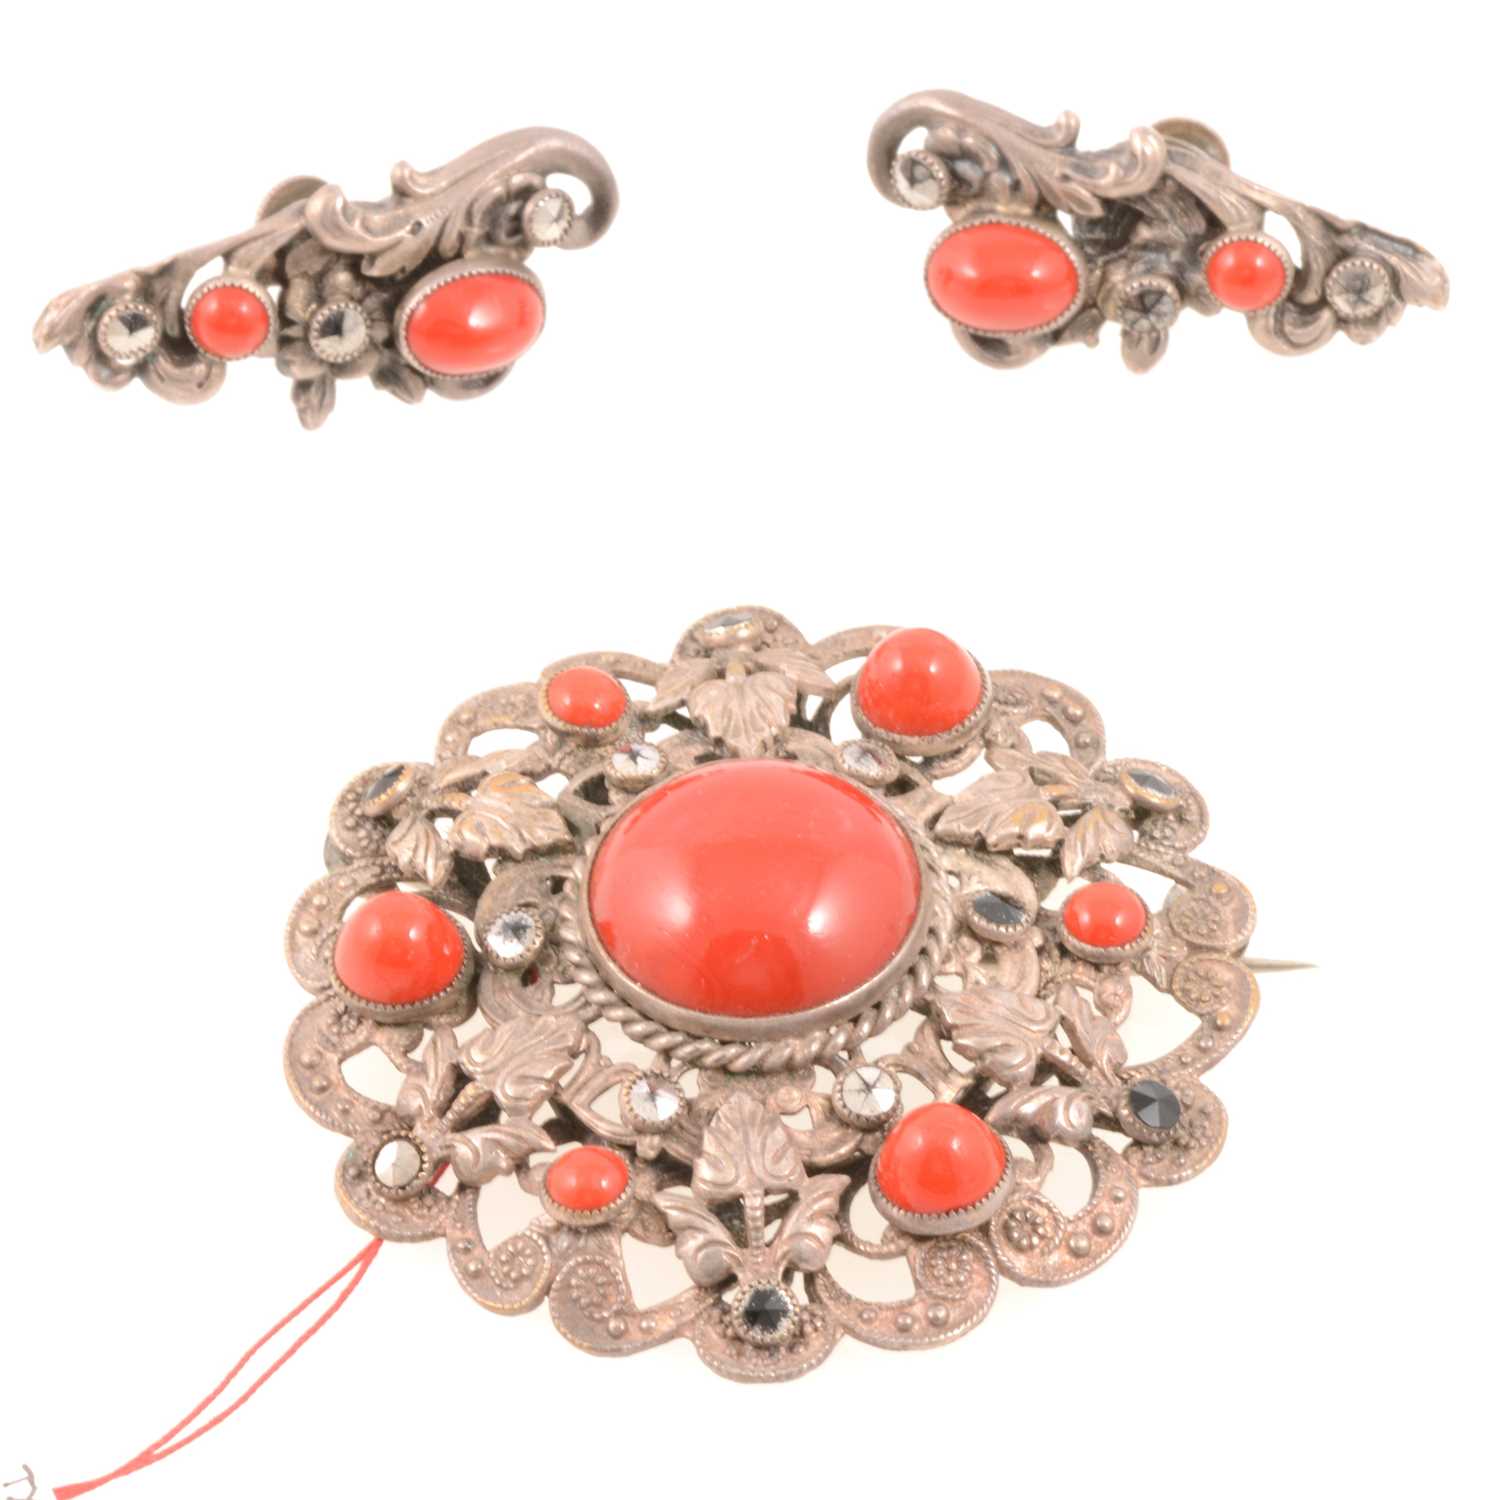 Lot 251 - 1930's brooch and earrings set with faux coral in the style of Max Neiger.